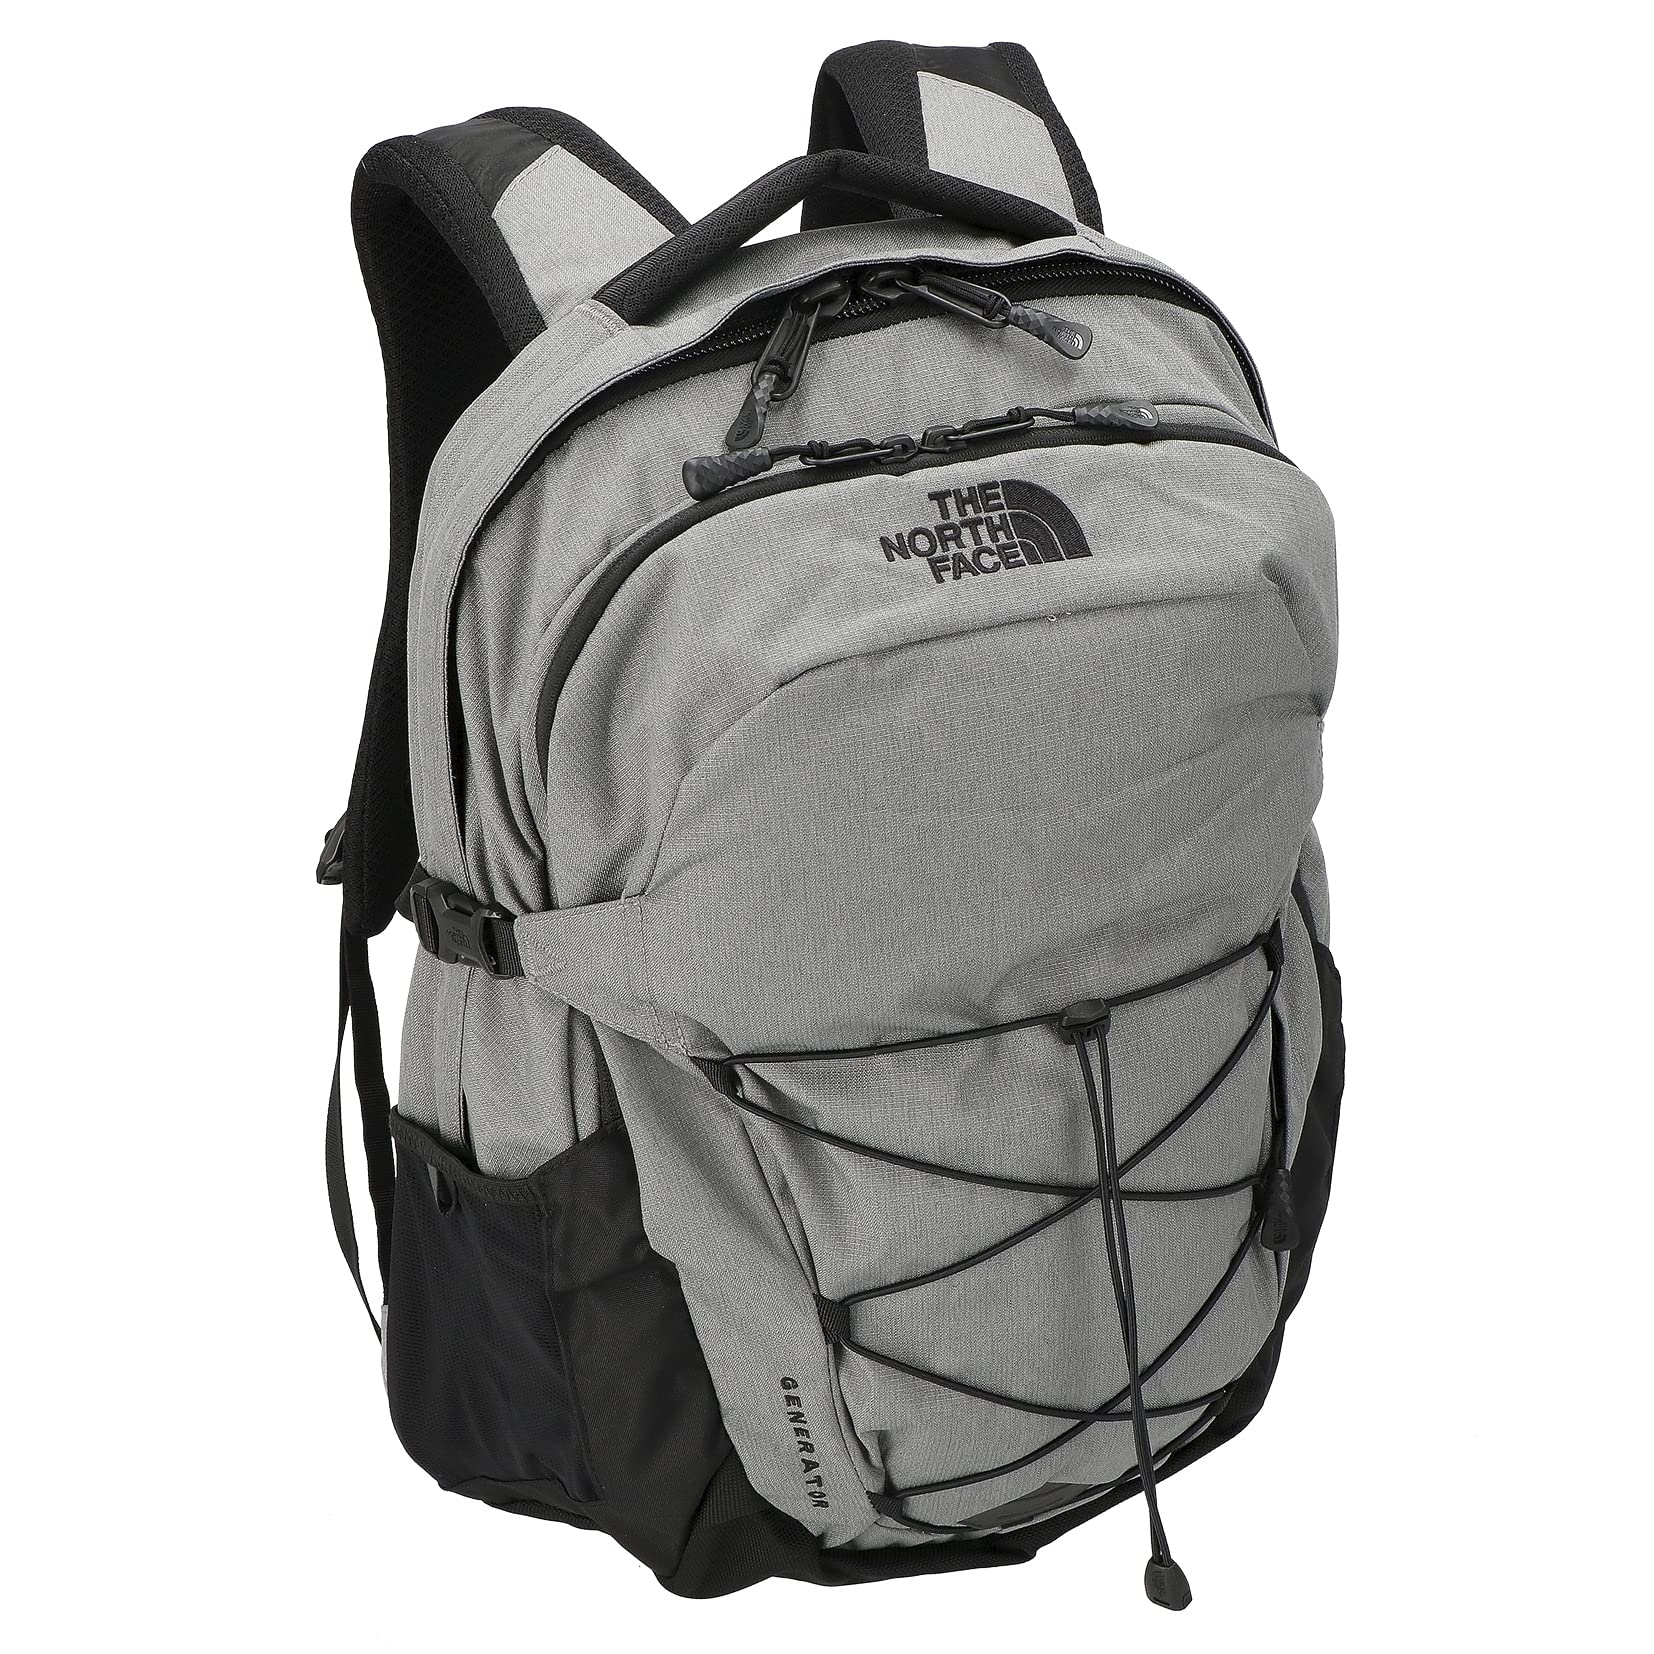 THE NORTH FACE GENERATOR E3D Backpack